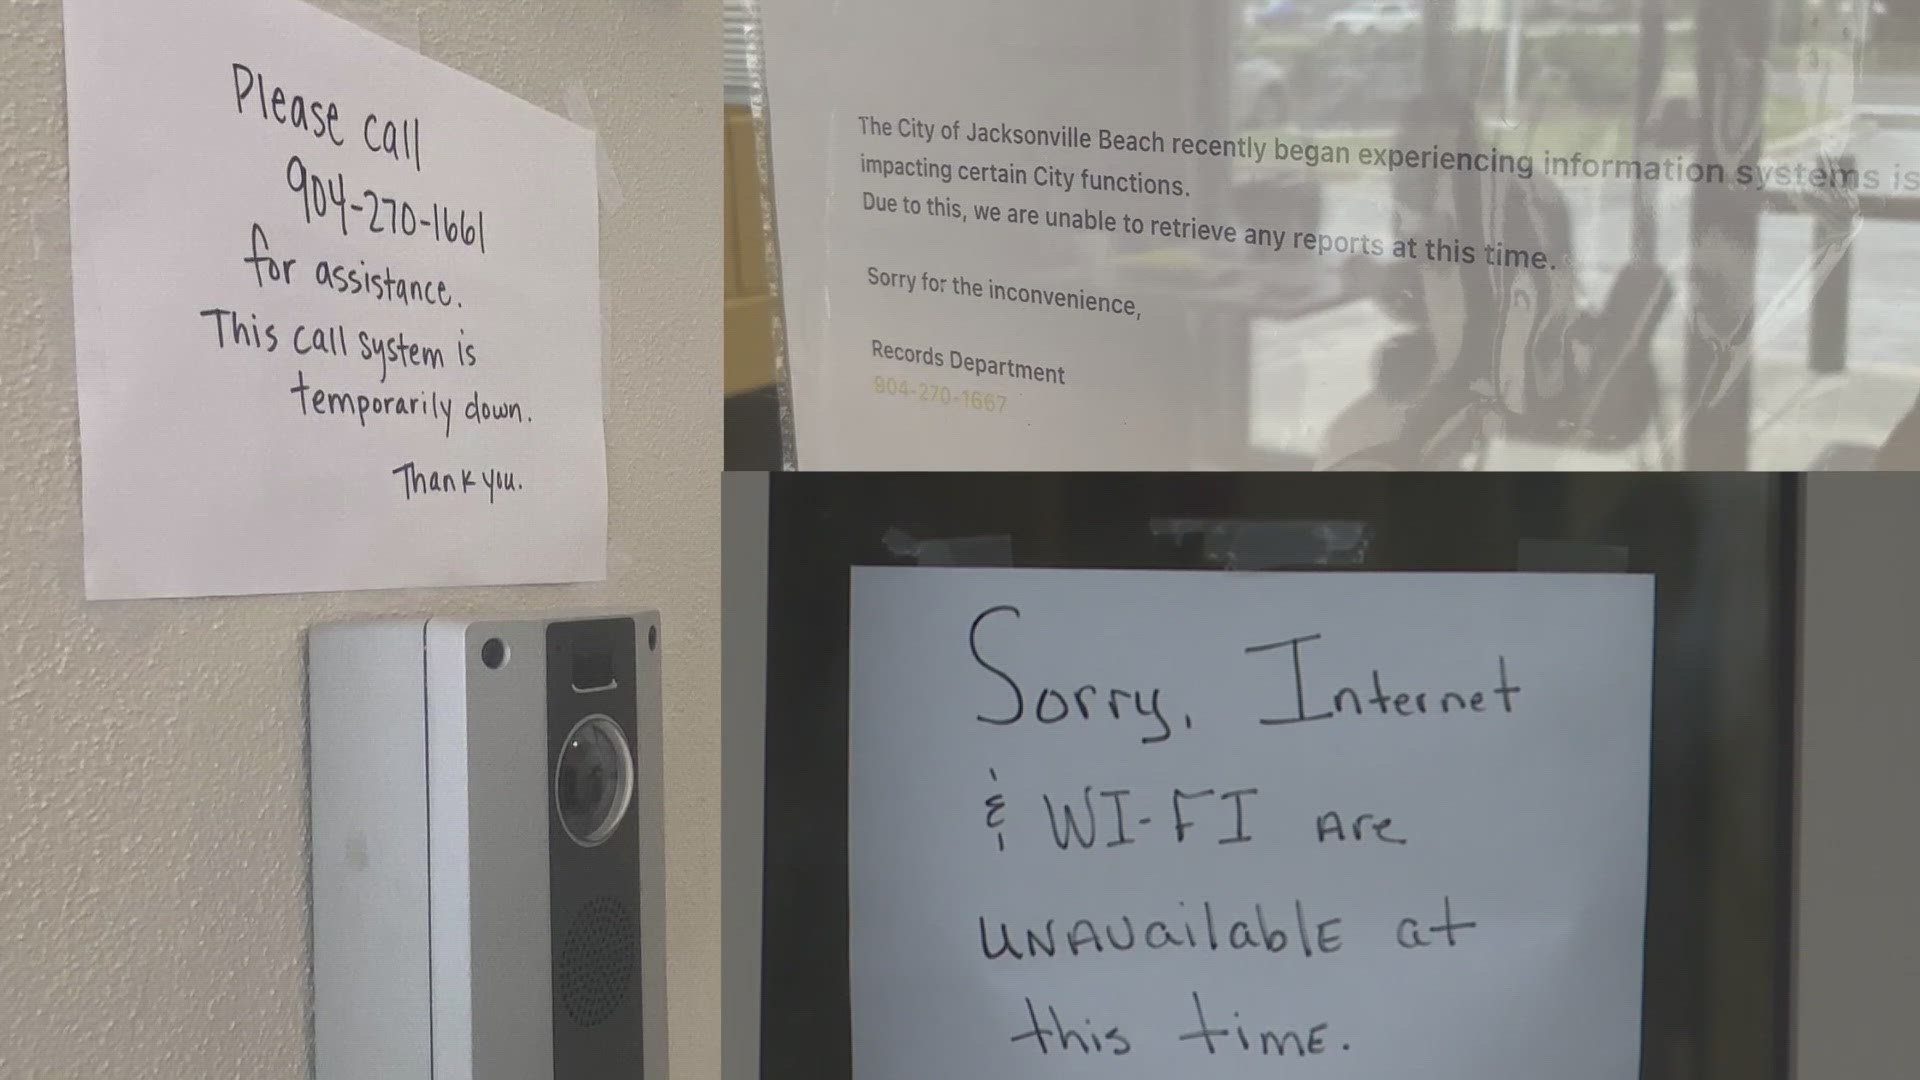 When asked if the City of Jacksonville was impacted by a ransomware attack, the city said "We are currently working to determine the nature and scope of the issues."